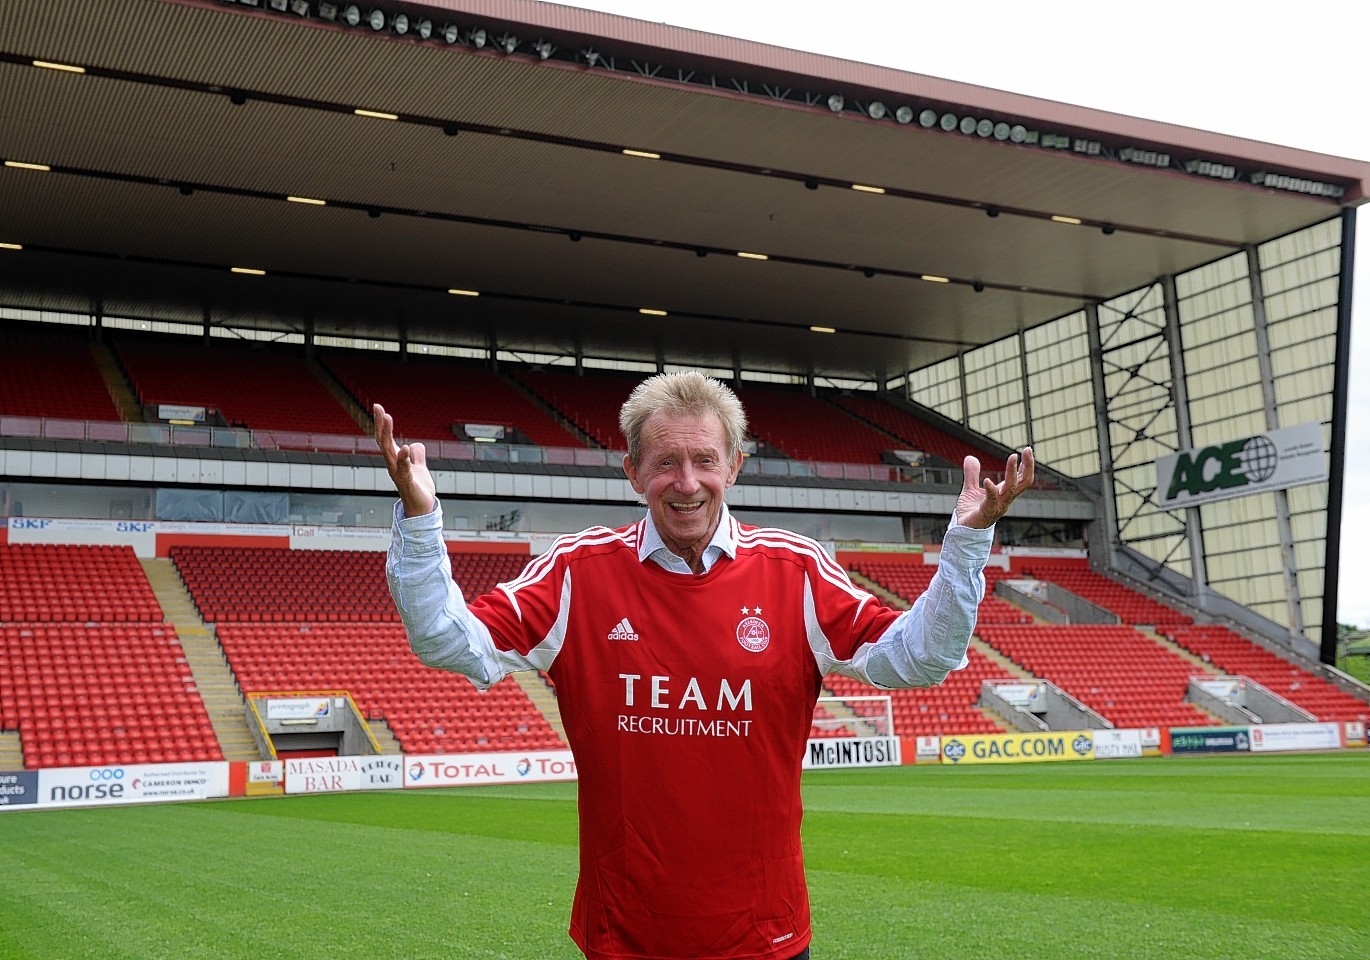 Law never played for the Dons but that doesn't stop the boyhood Aberdeen fan from pulling on a strip